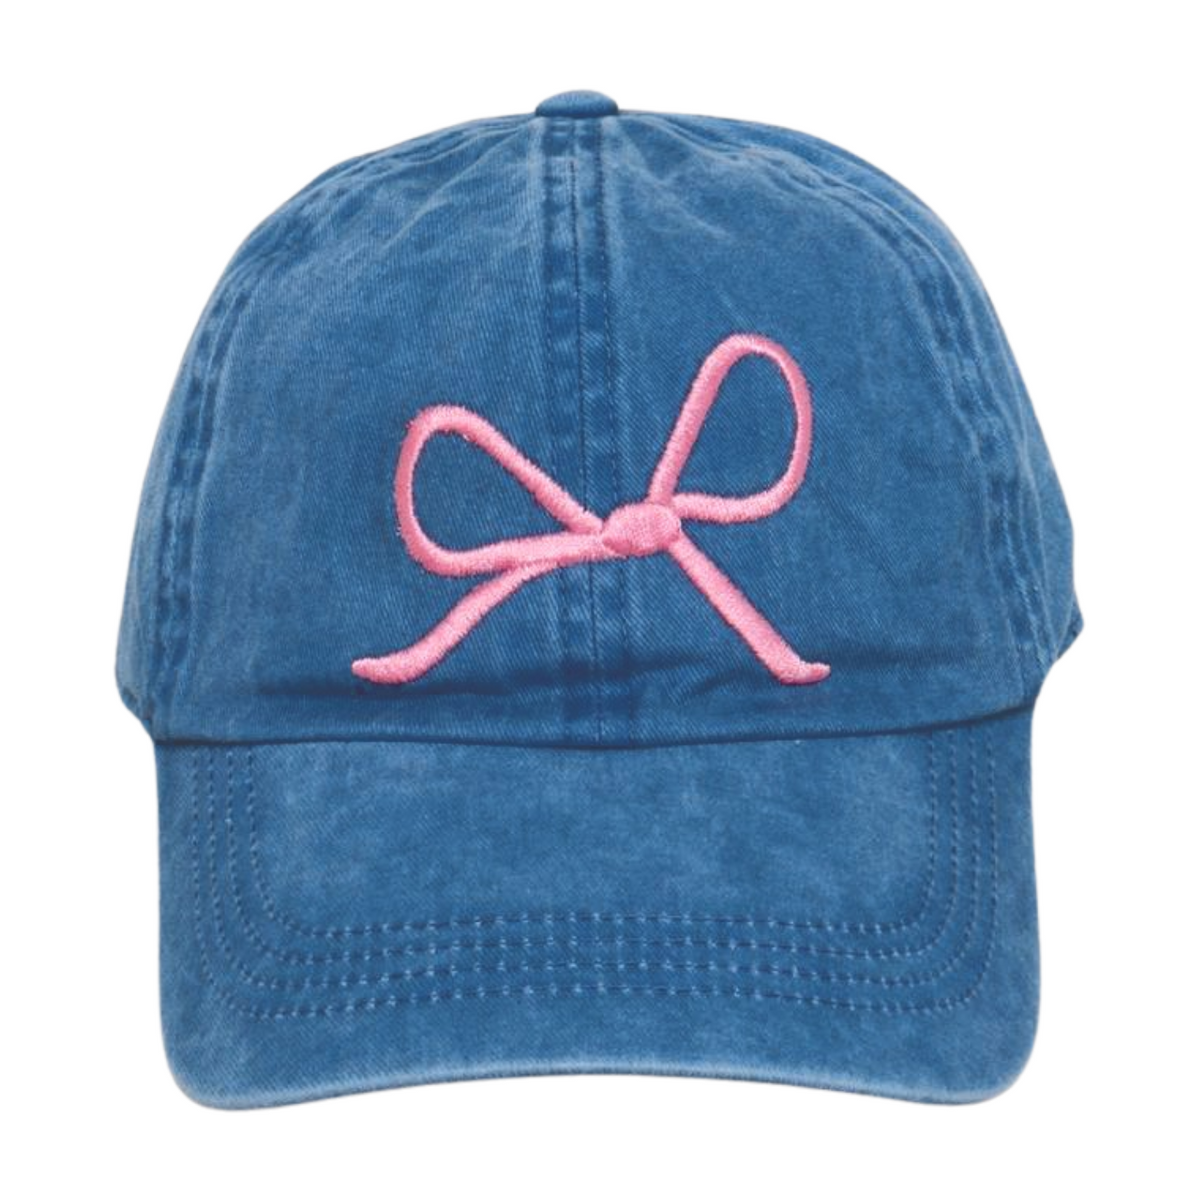 LCAP3620 - BOW EMBROIDERED COTTON BASEBALL CAP